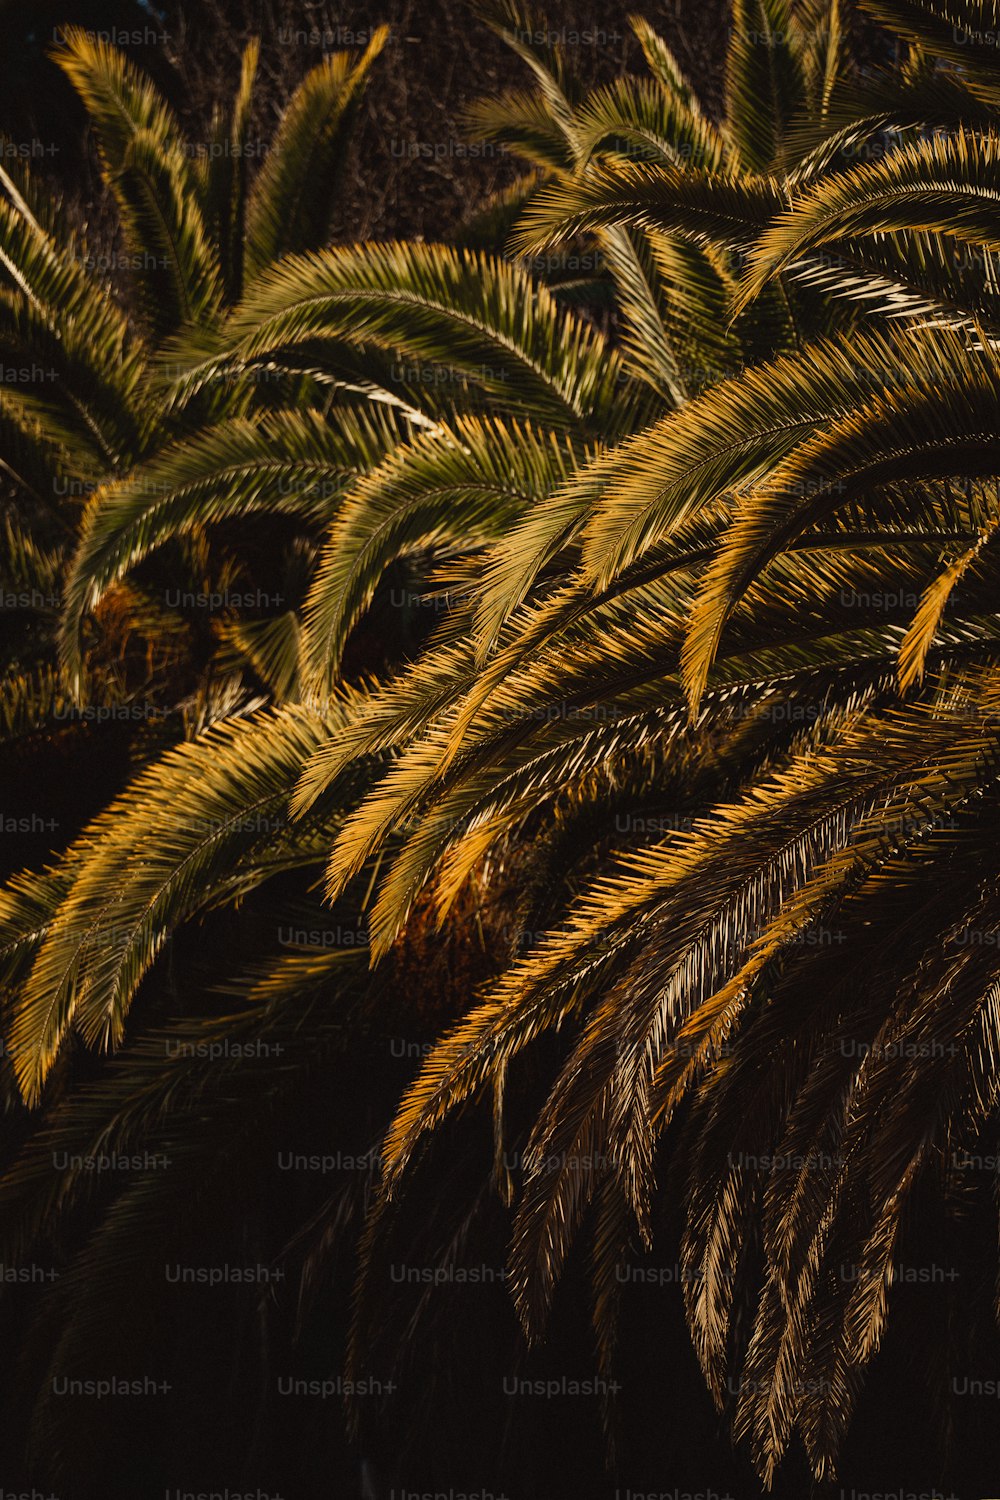 a close up of a palm tree with yellow and green leaves